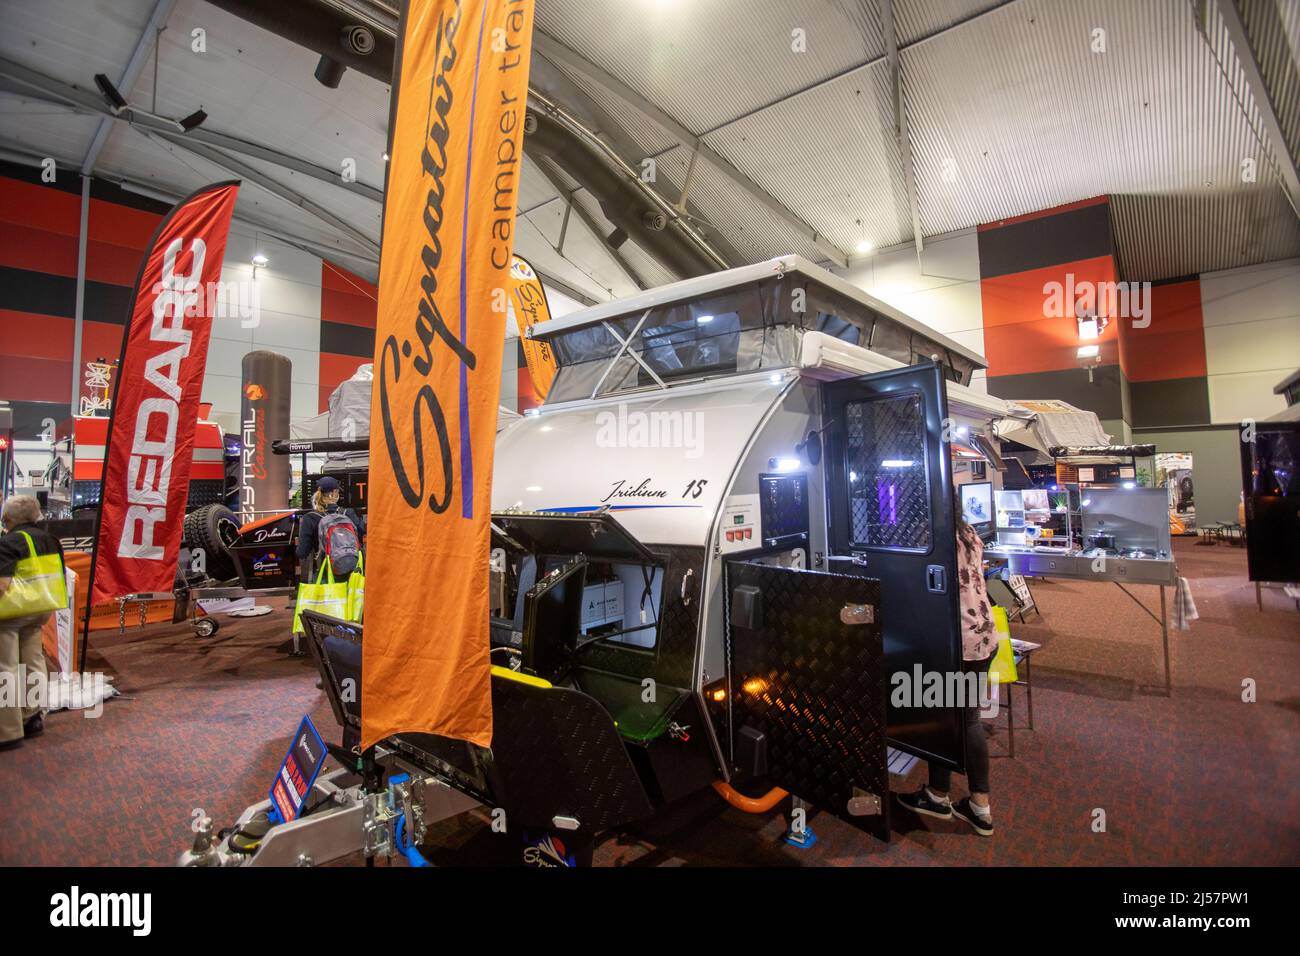 Signature camper trailer hybrid at the sydney caravan and camping show,NSW,Australia Stock Photo